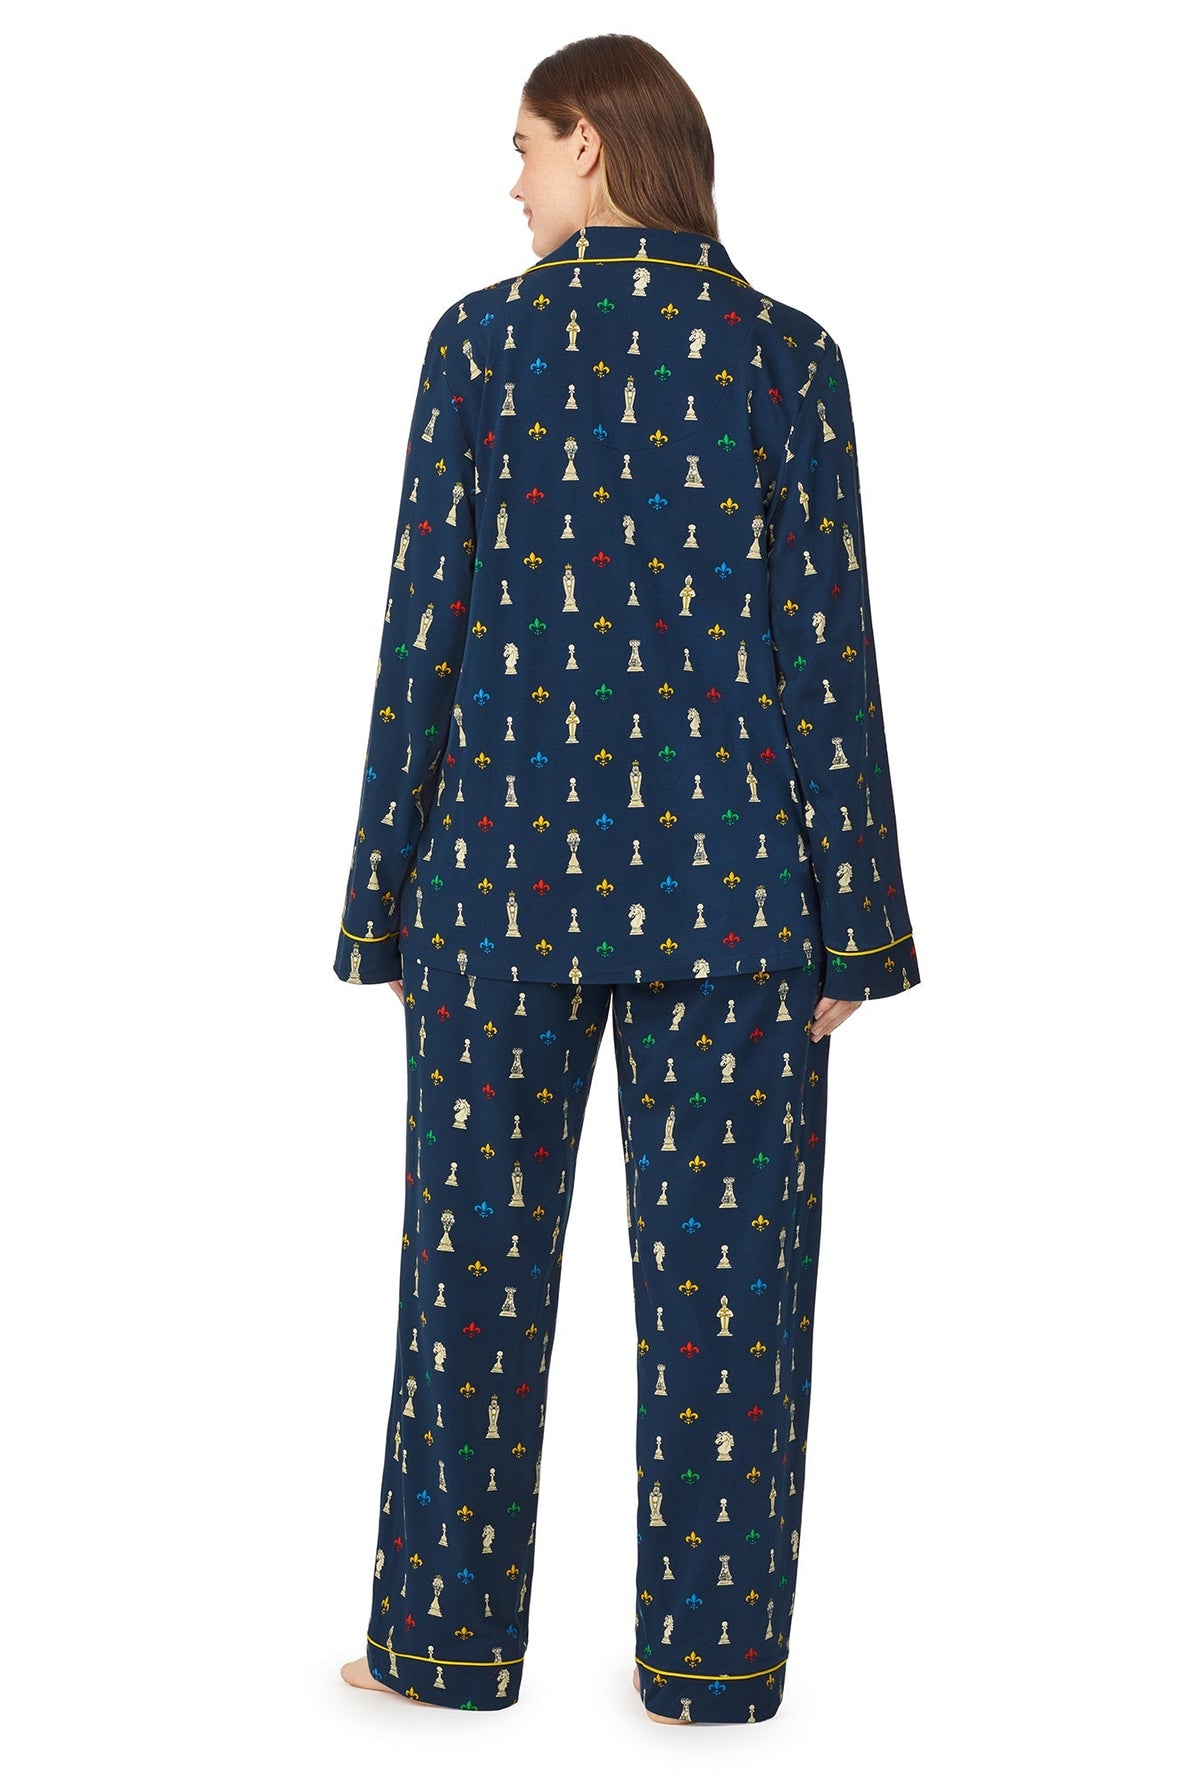 A girl wearing a navy blue long sleeve stretch jersey pj set plus size with checkmate pattern.